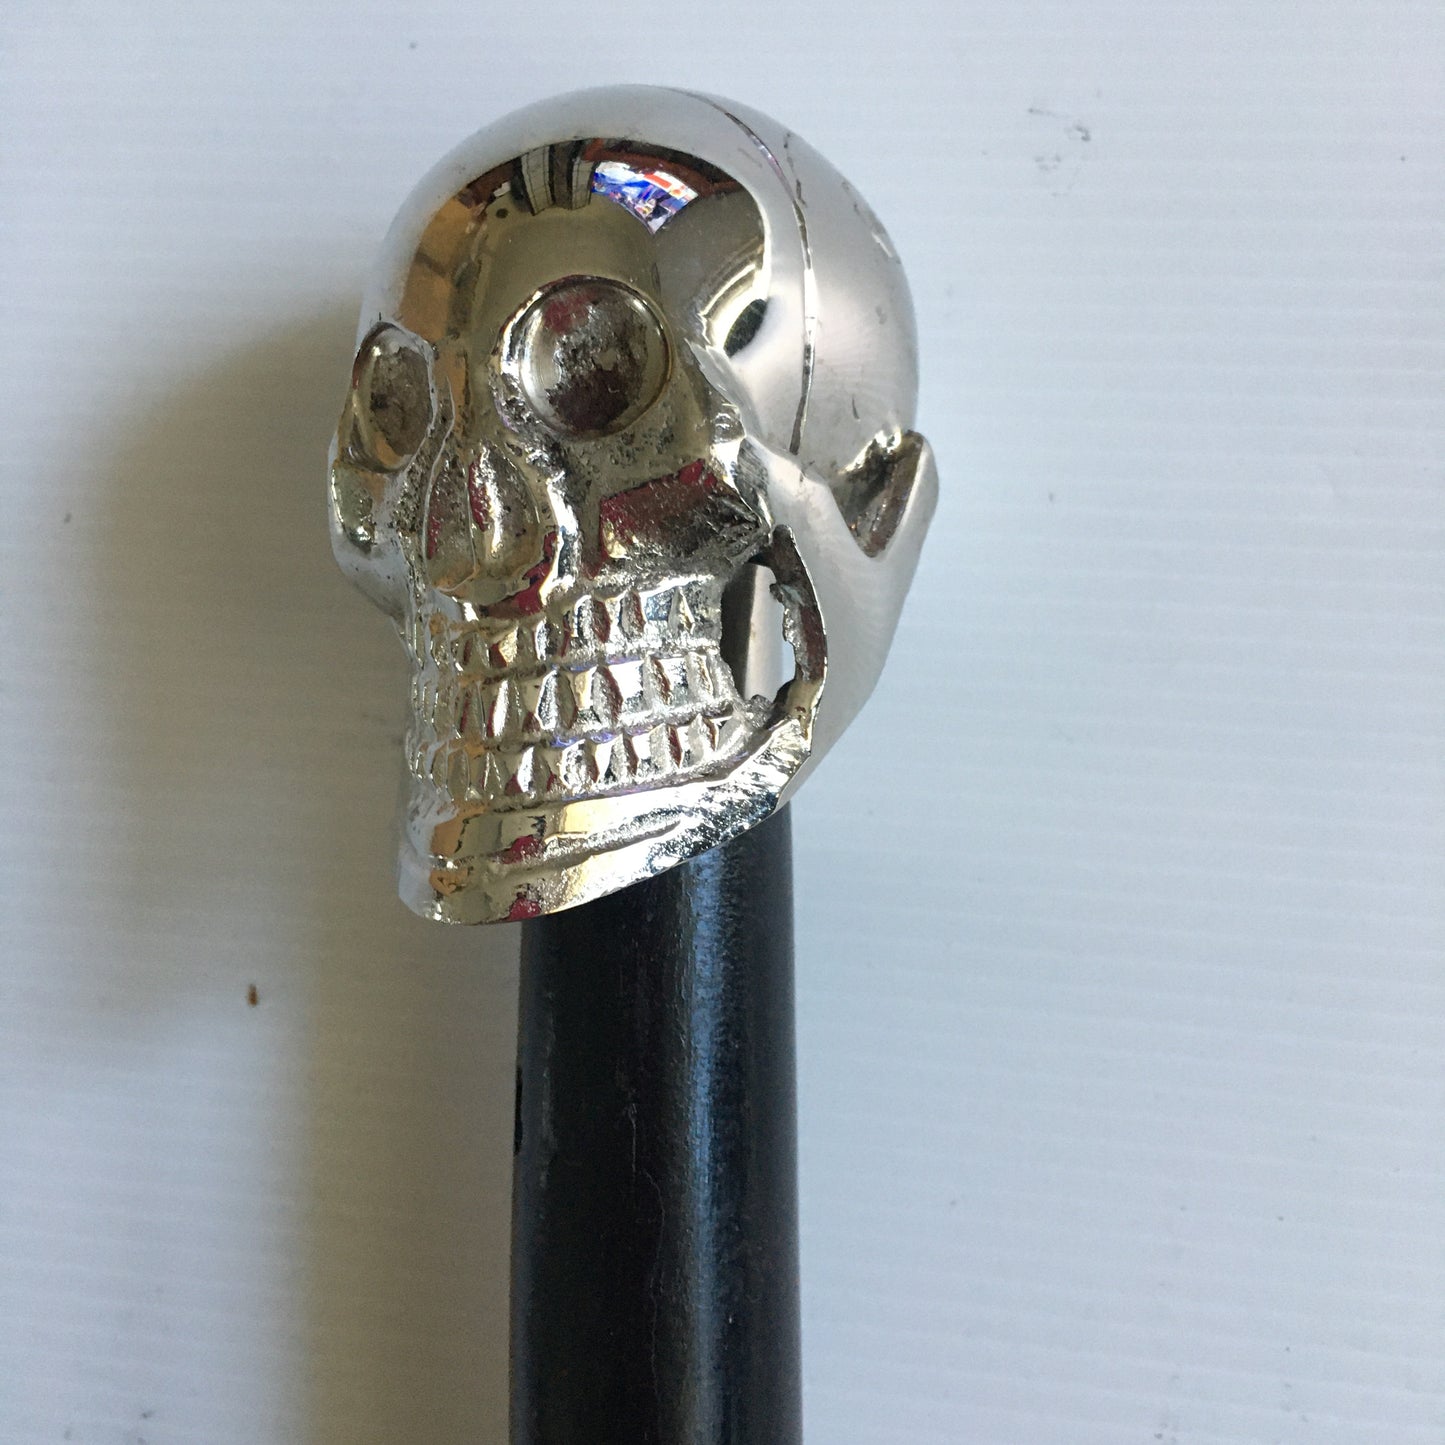 Walking Stick with Silver Skull design Handle on a Plain black stick or turned wood stick.